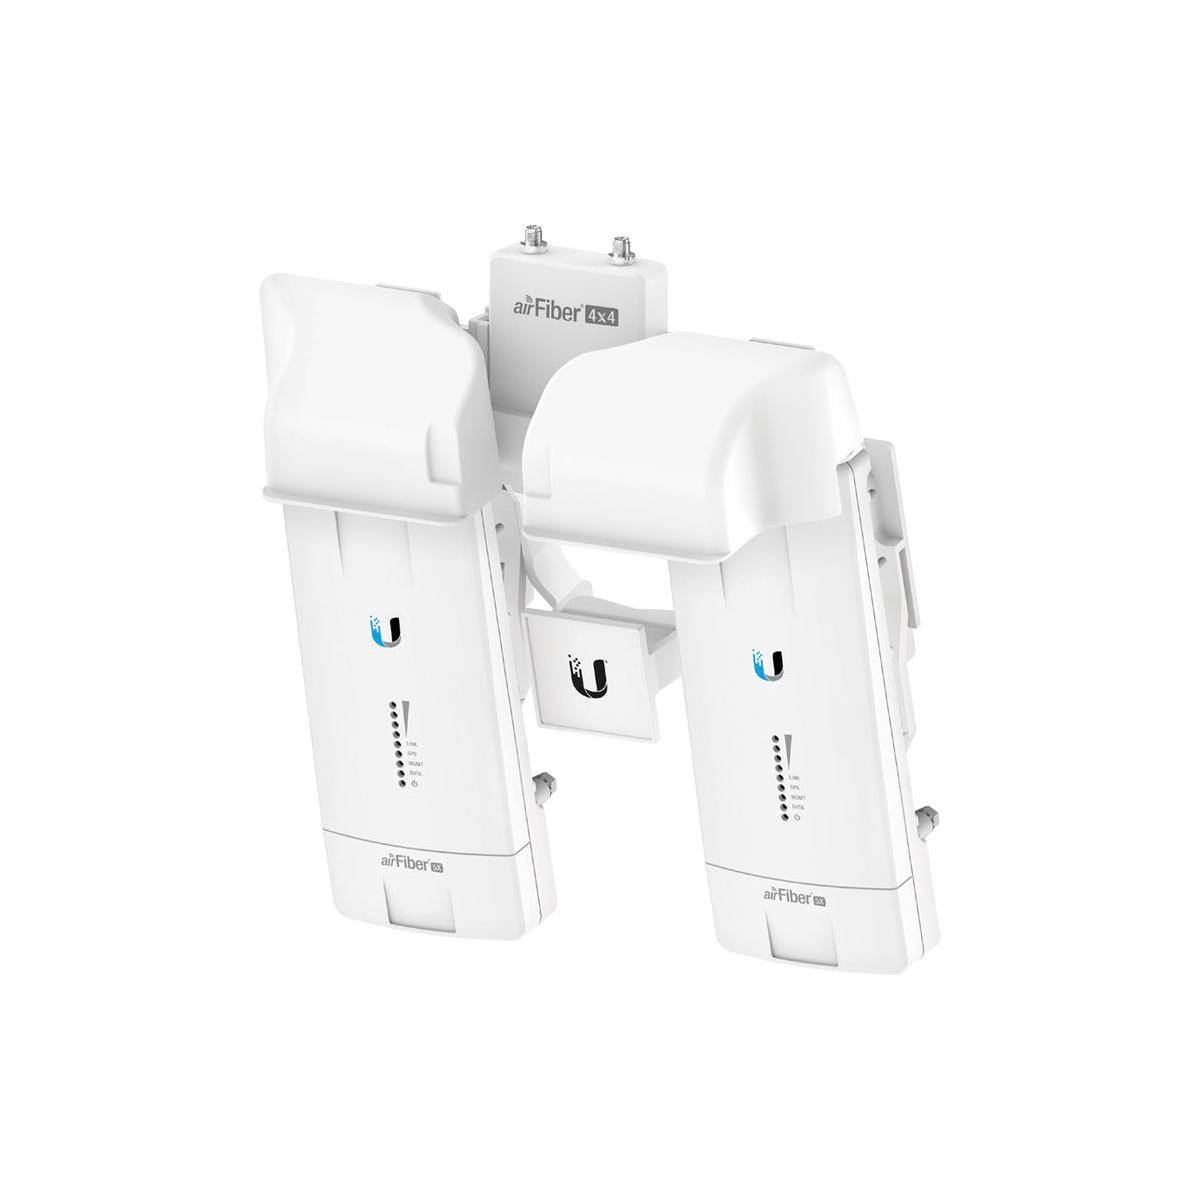 Image of Ubiquiti Networks 4x4 Scalable airFiber MIMO Multiplexer